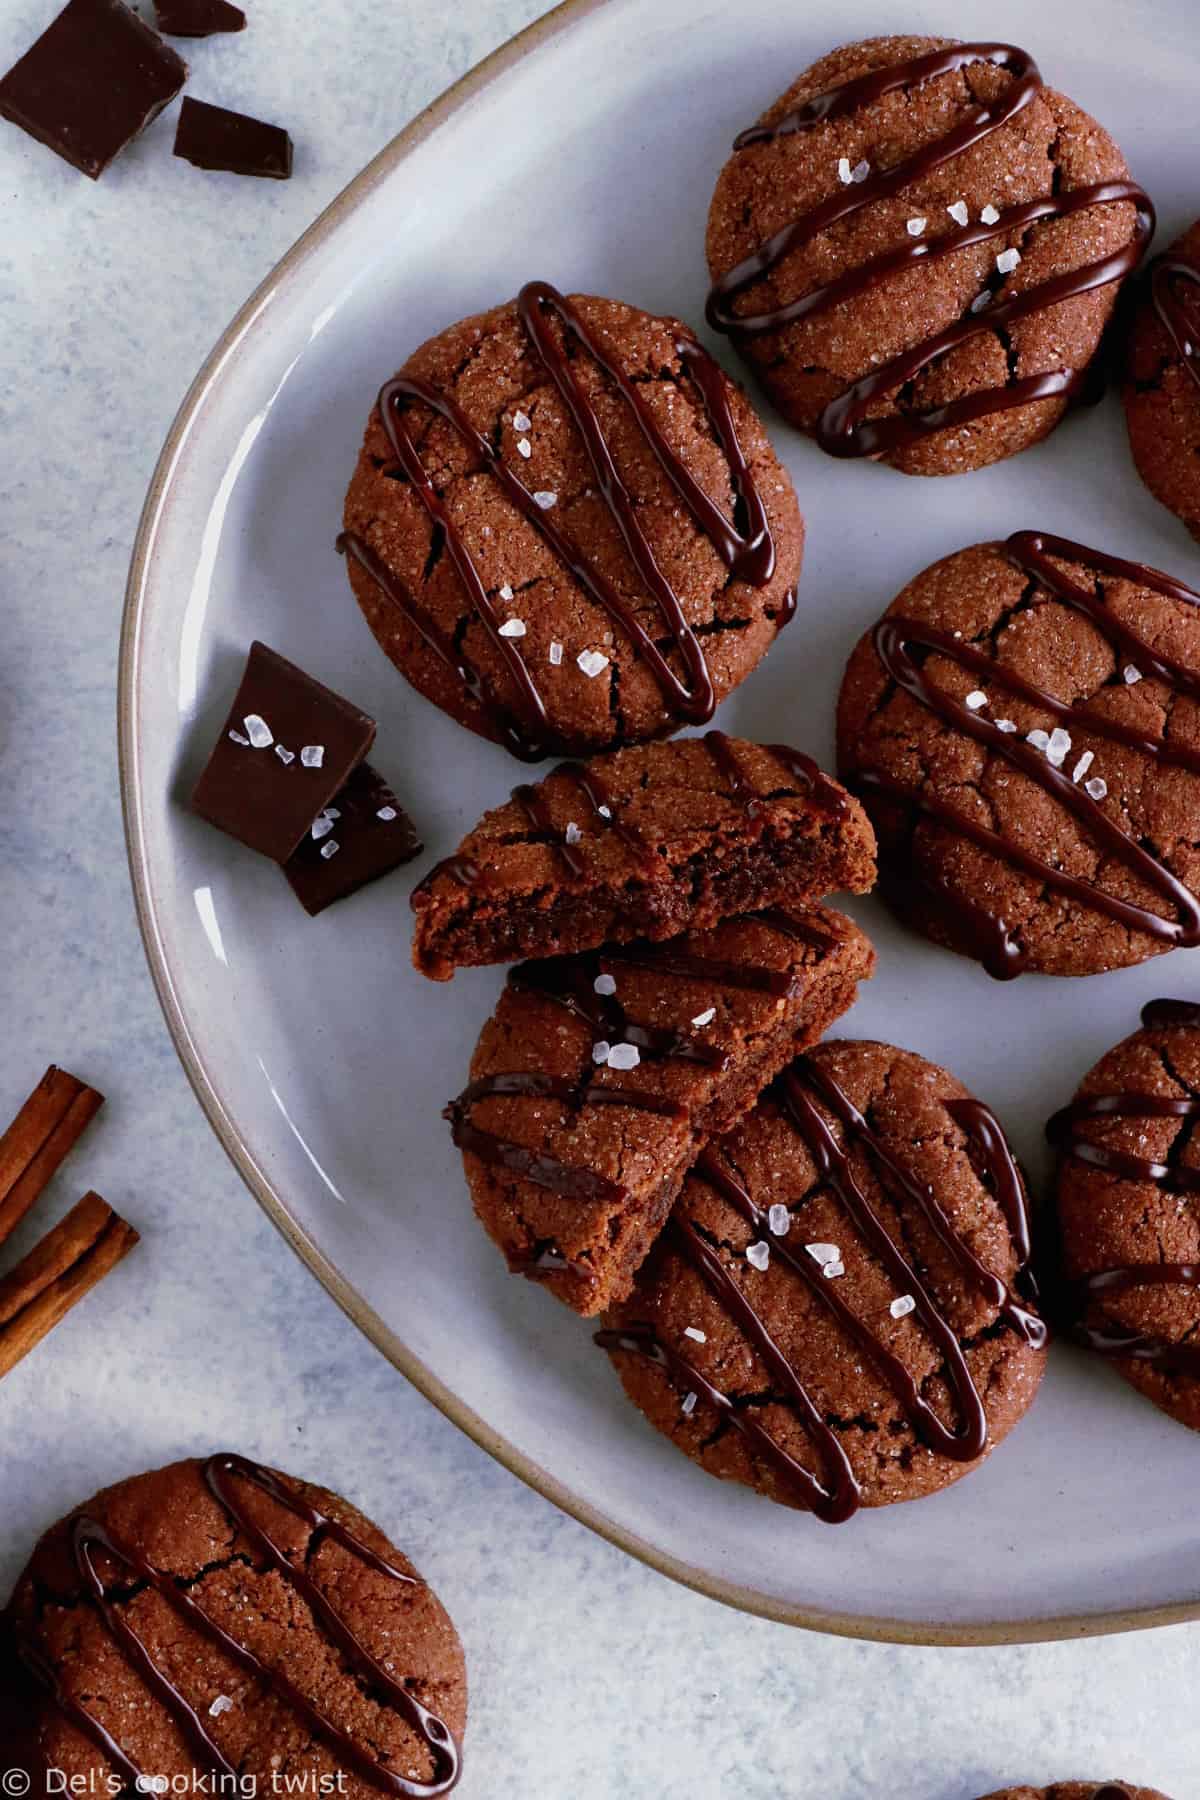 Mexican Chocolate snickerdoodles are a lovely take on the classic snickerdoodles that pack a powerful flavor punch.